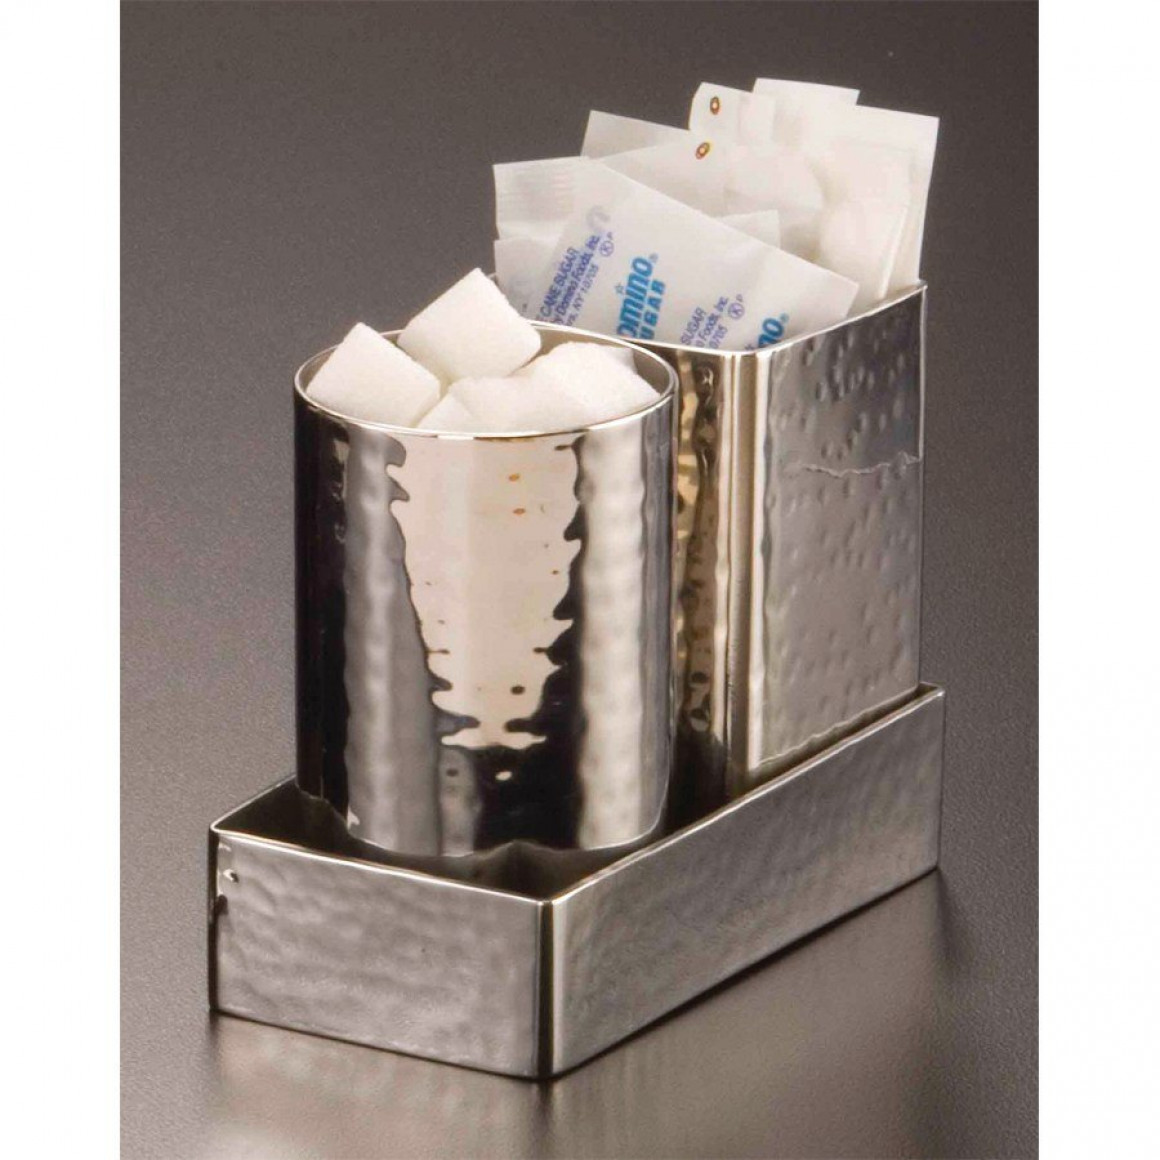 HOLDER, SUGAR PACKET/CUBE, STAINLESS STEEL, HAMMERED, SQUARE